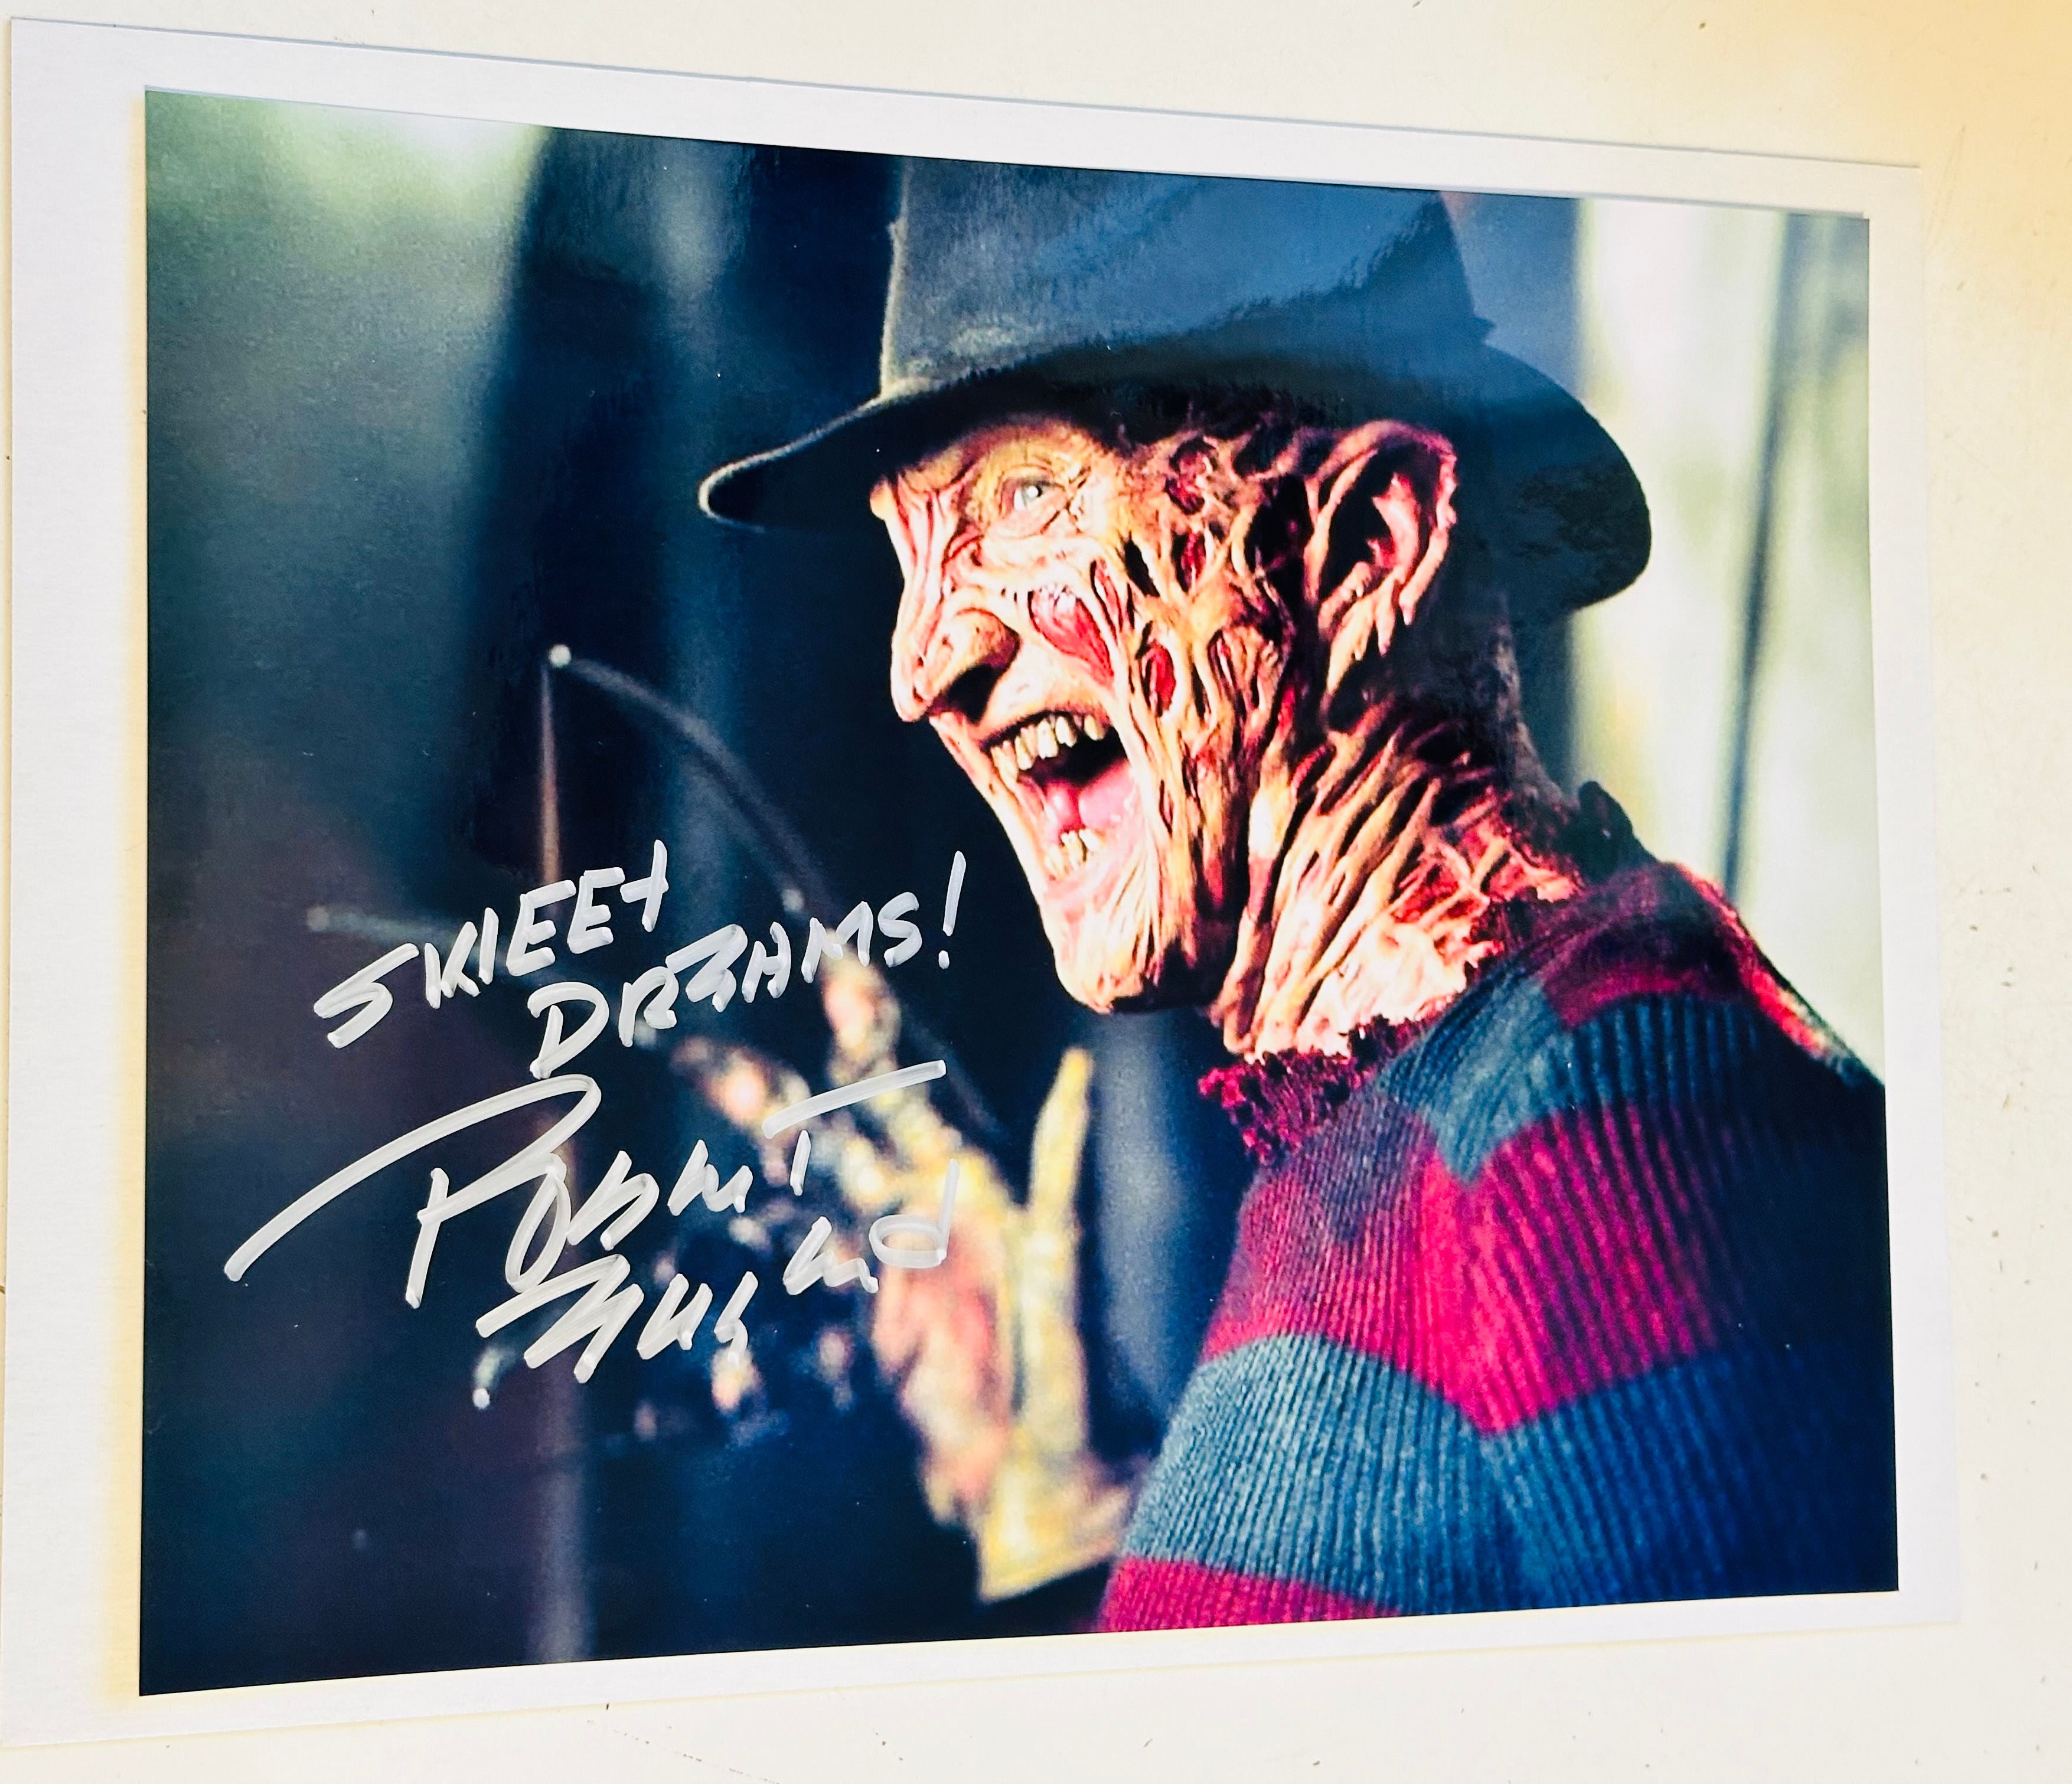 Nightmare on Elm Street Freddie Kruger rare Robert Englund autograph 8x10 certified by Fanexpo